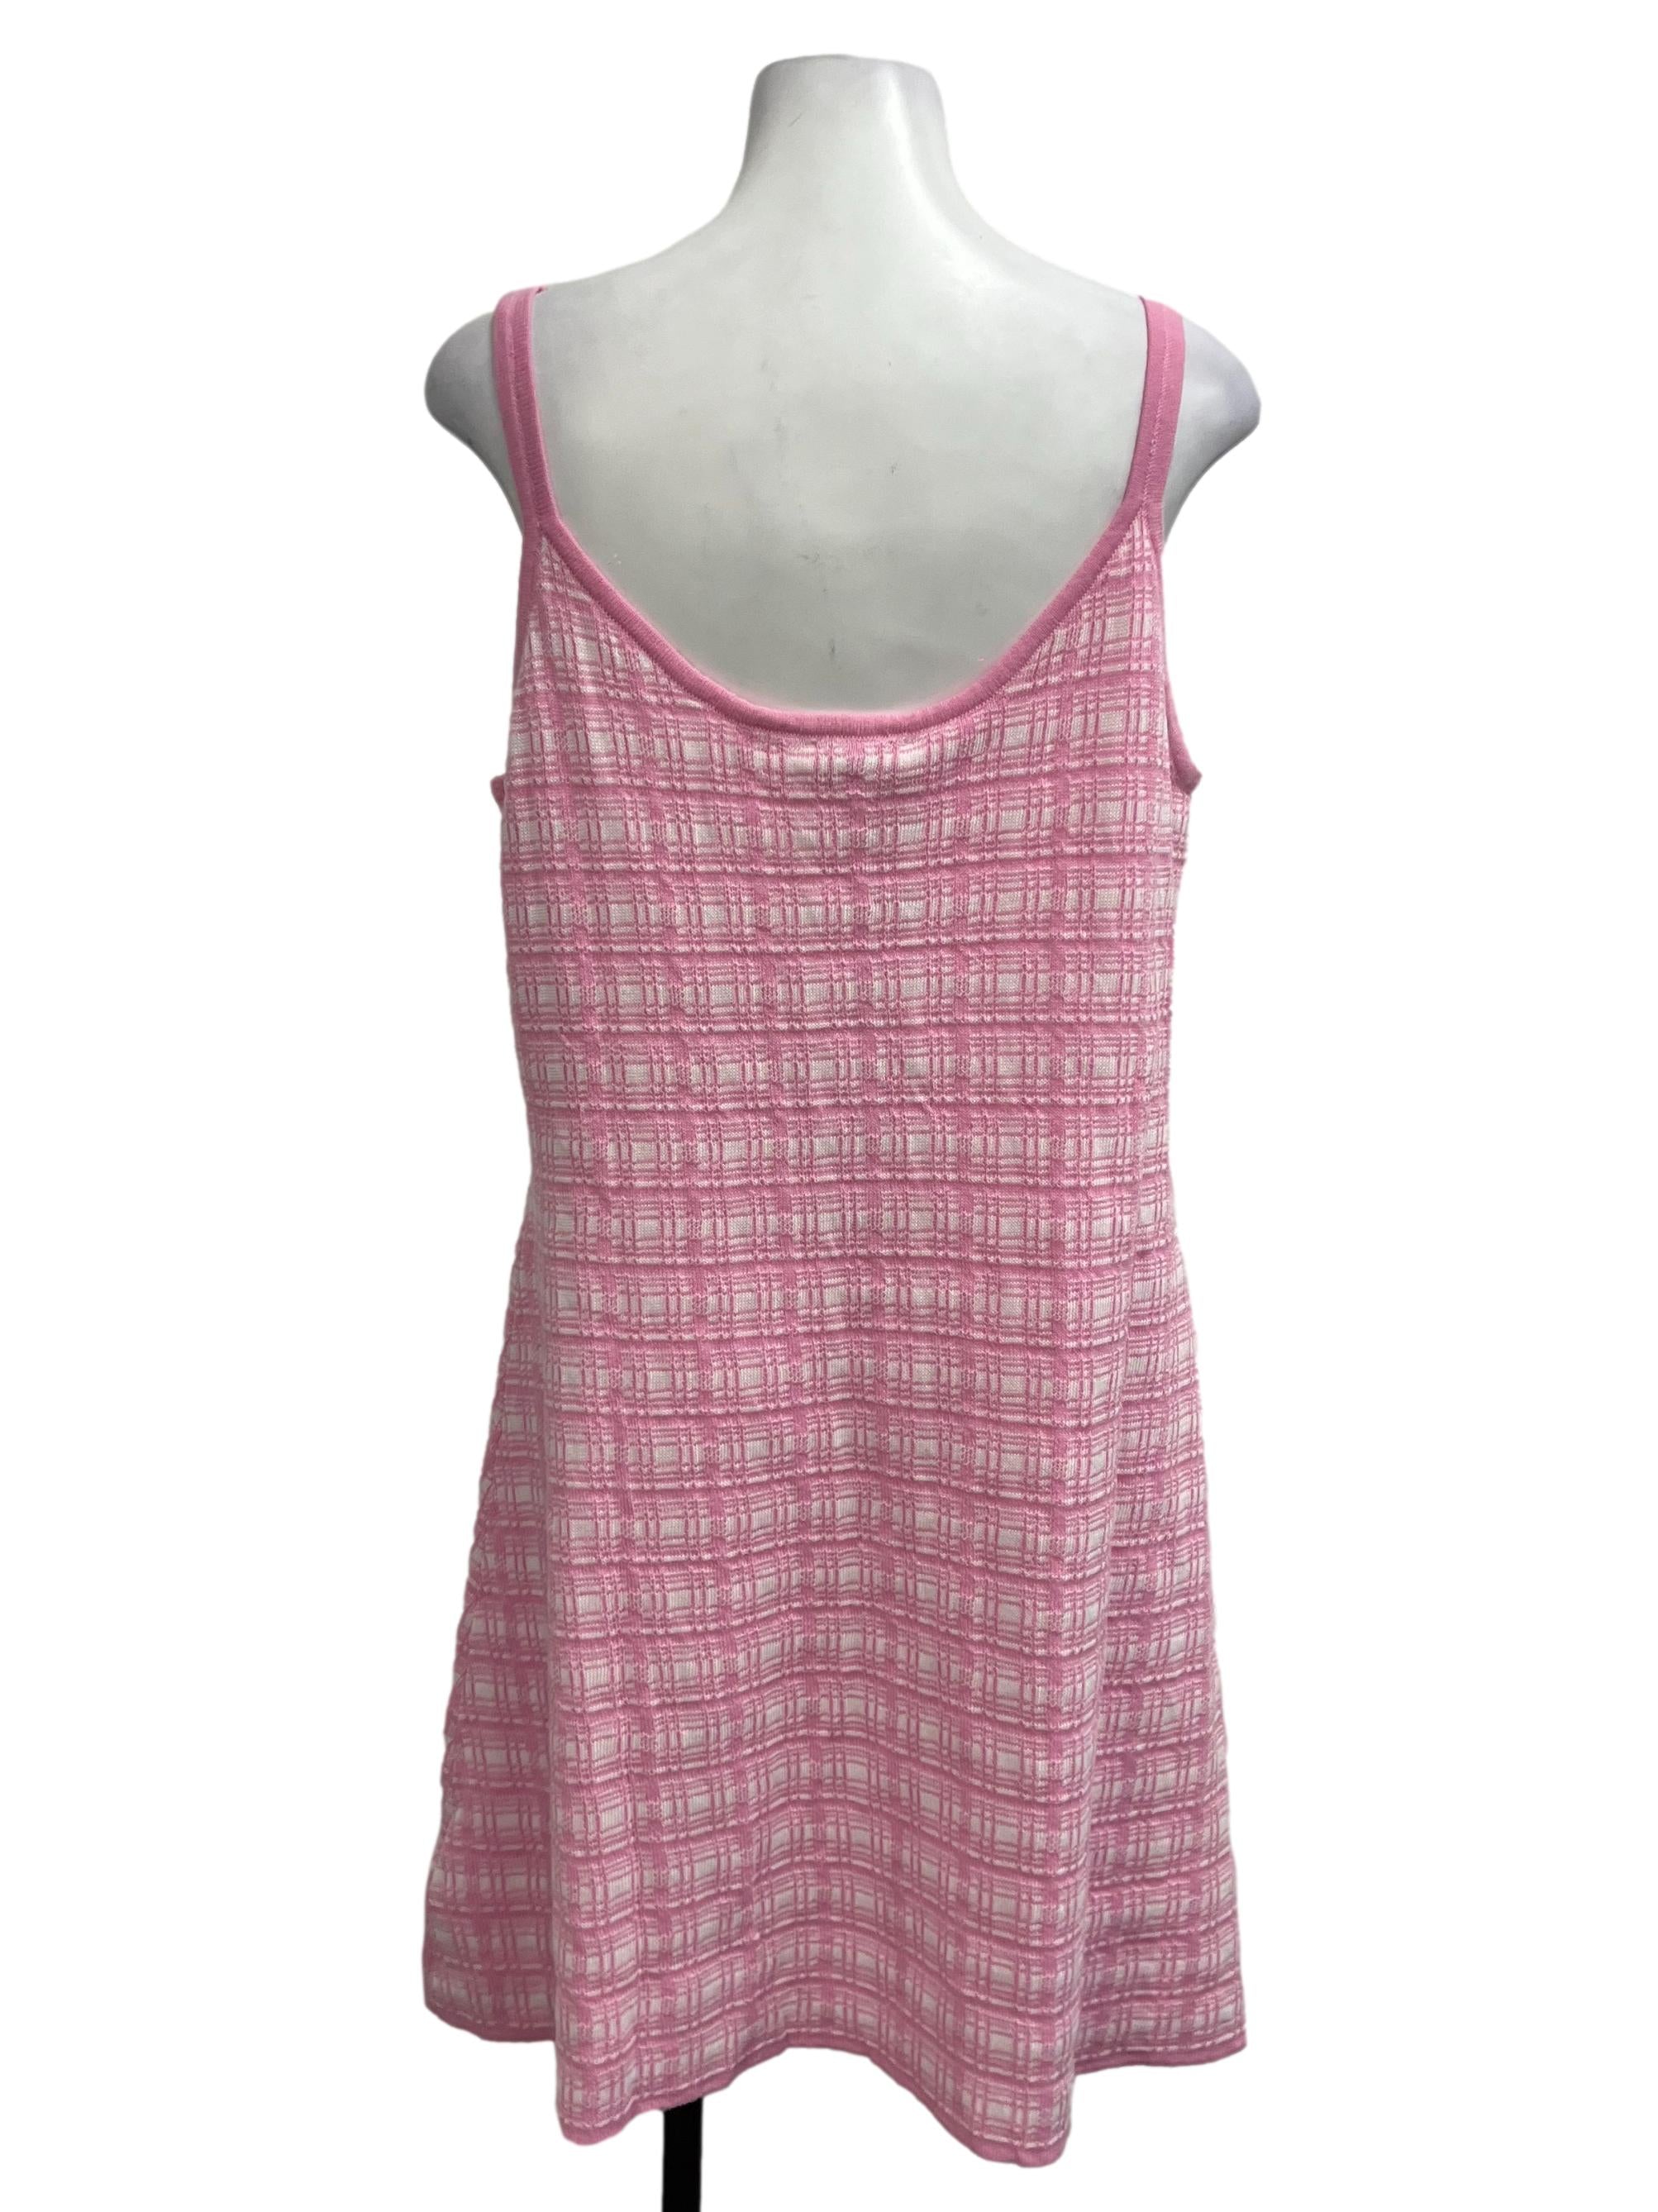 Pink And White Checkered Knit Dress